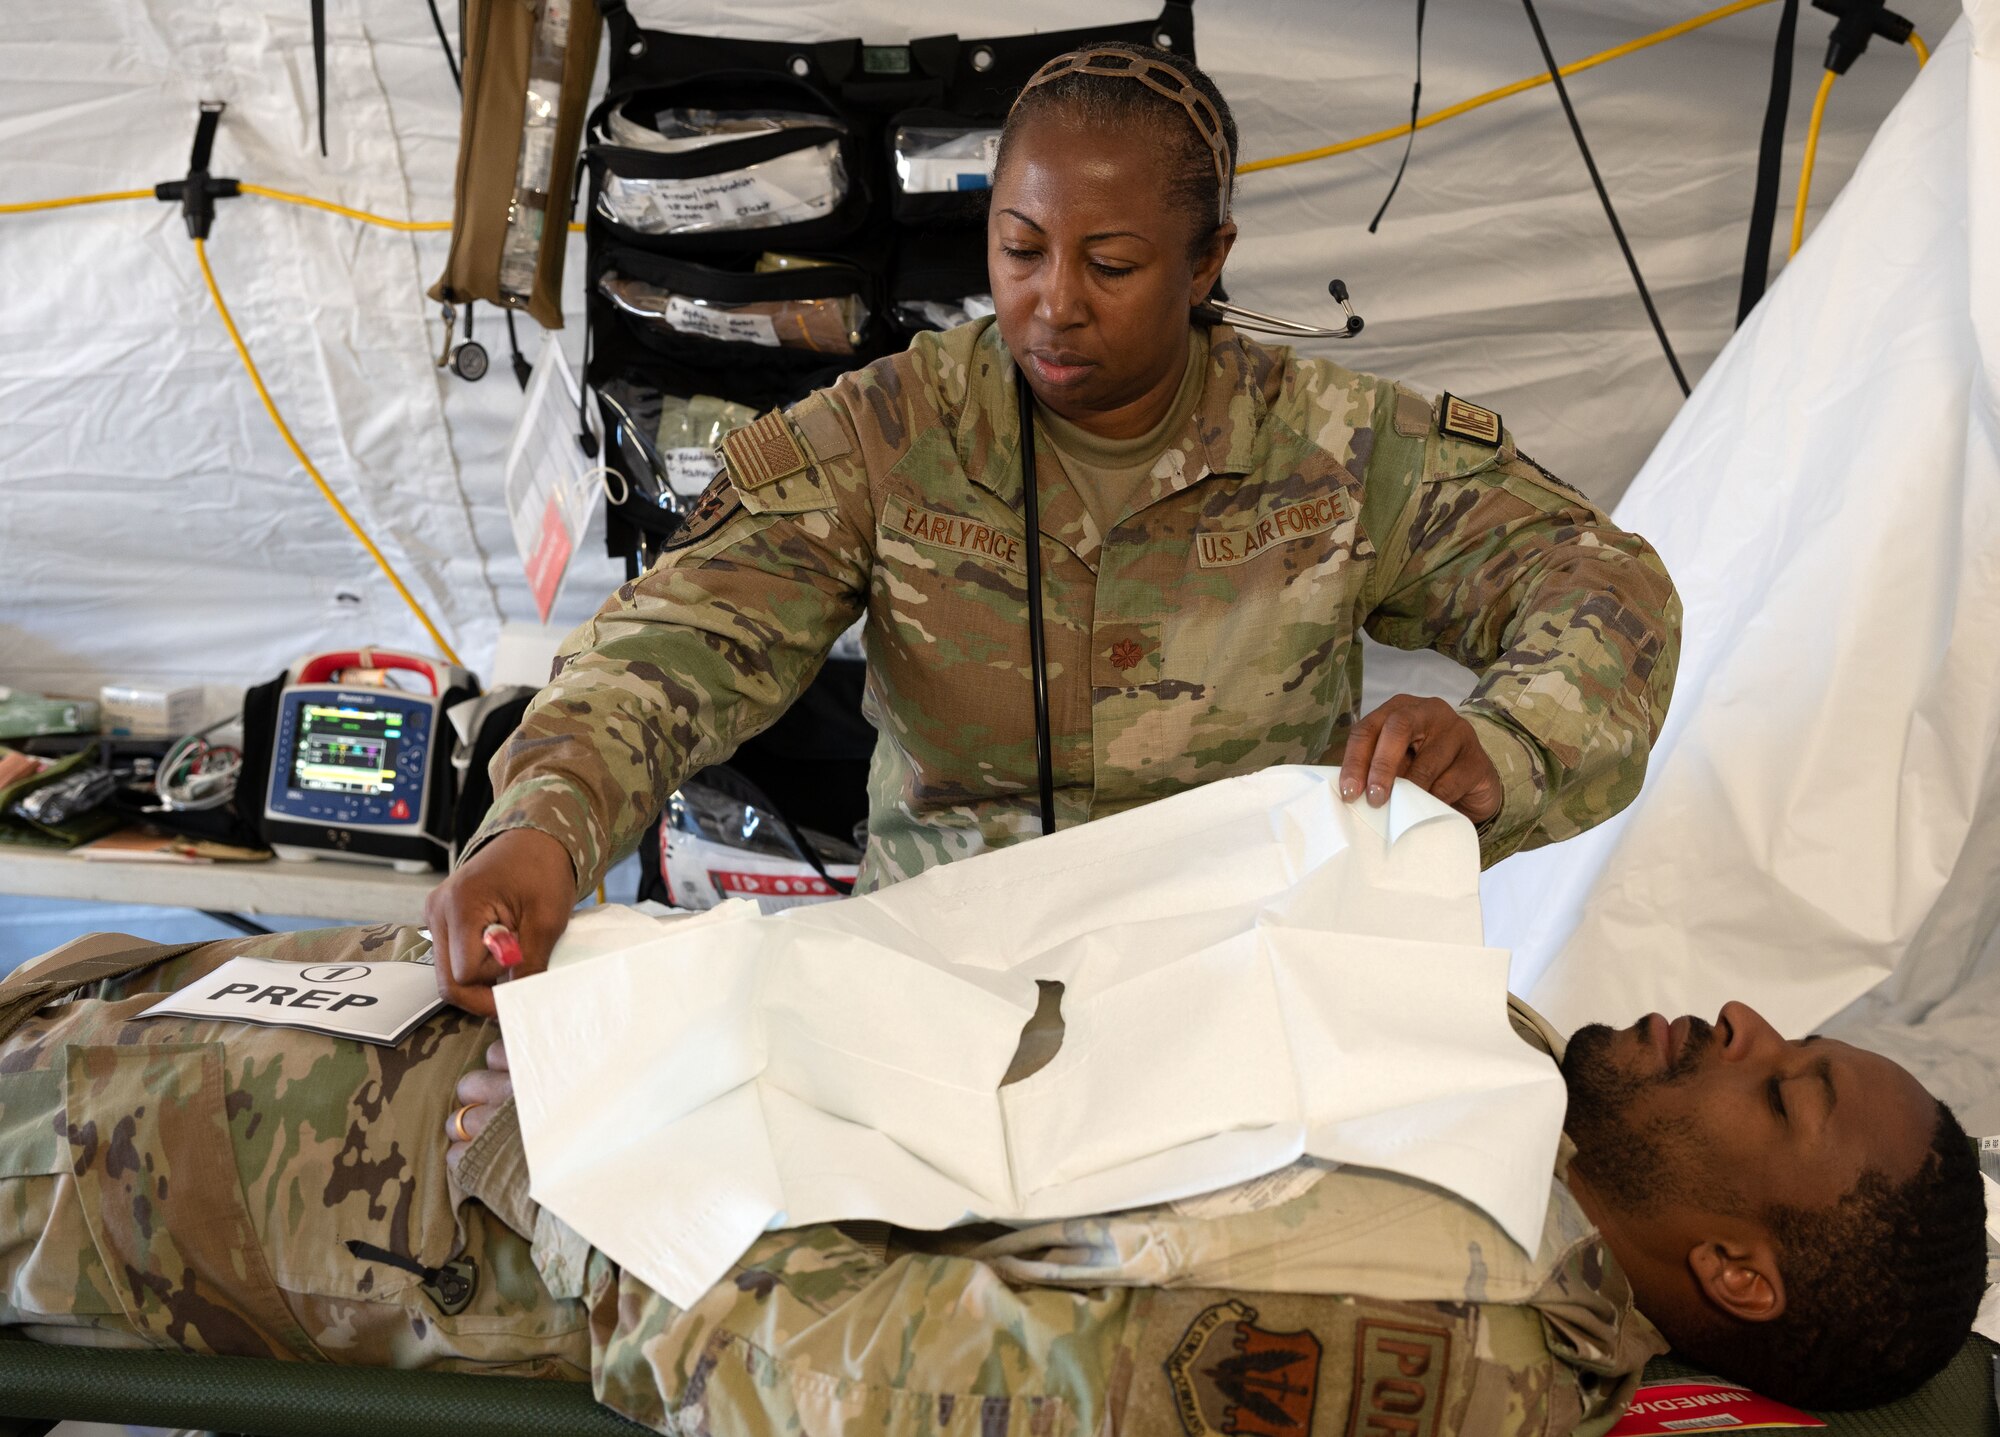 Maj. Shannon Earlyrice, 4th Medical Group nurse, prepares a simulated patient for treatment as part of a mass casualty event during exercise Agile Cub 4 at Marine Corps Air Station Cherry Point, North Carolina, March 8, 2023. The exercise scenario allowed medics assigned to the 4th Medical Group to receive advanced combat medical training in a deployed environment to ensure they are ready for any incident. This agile combat employment exercise shifts the generation of airpower from large, centralized bases to networks of smaller, dispersed locations.